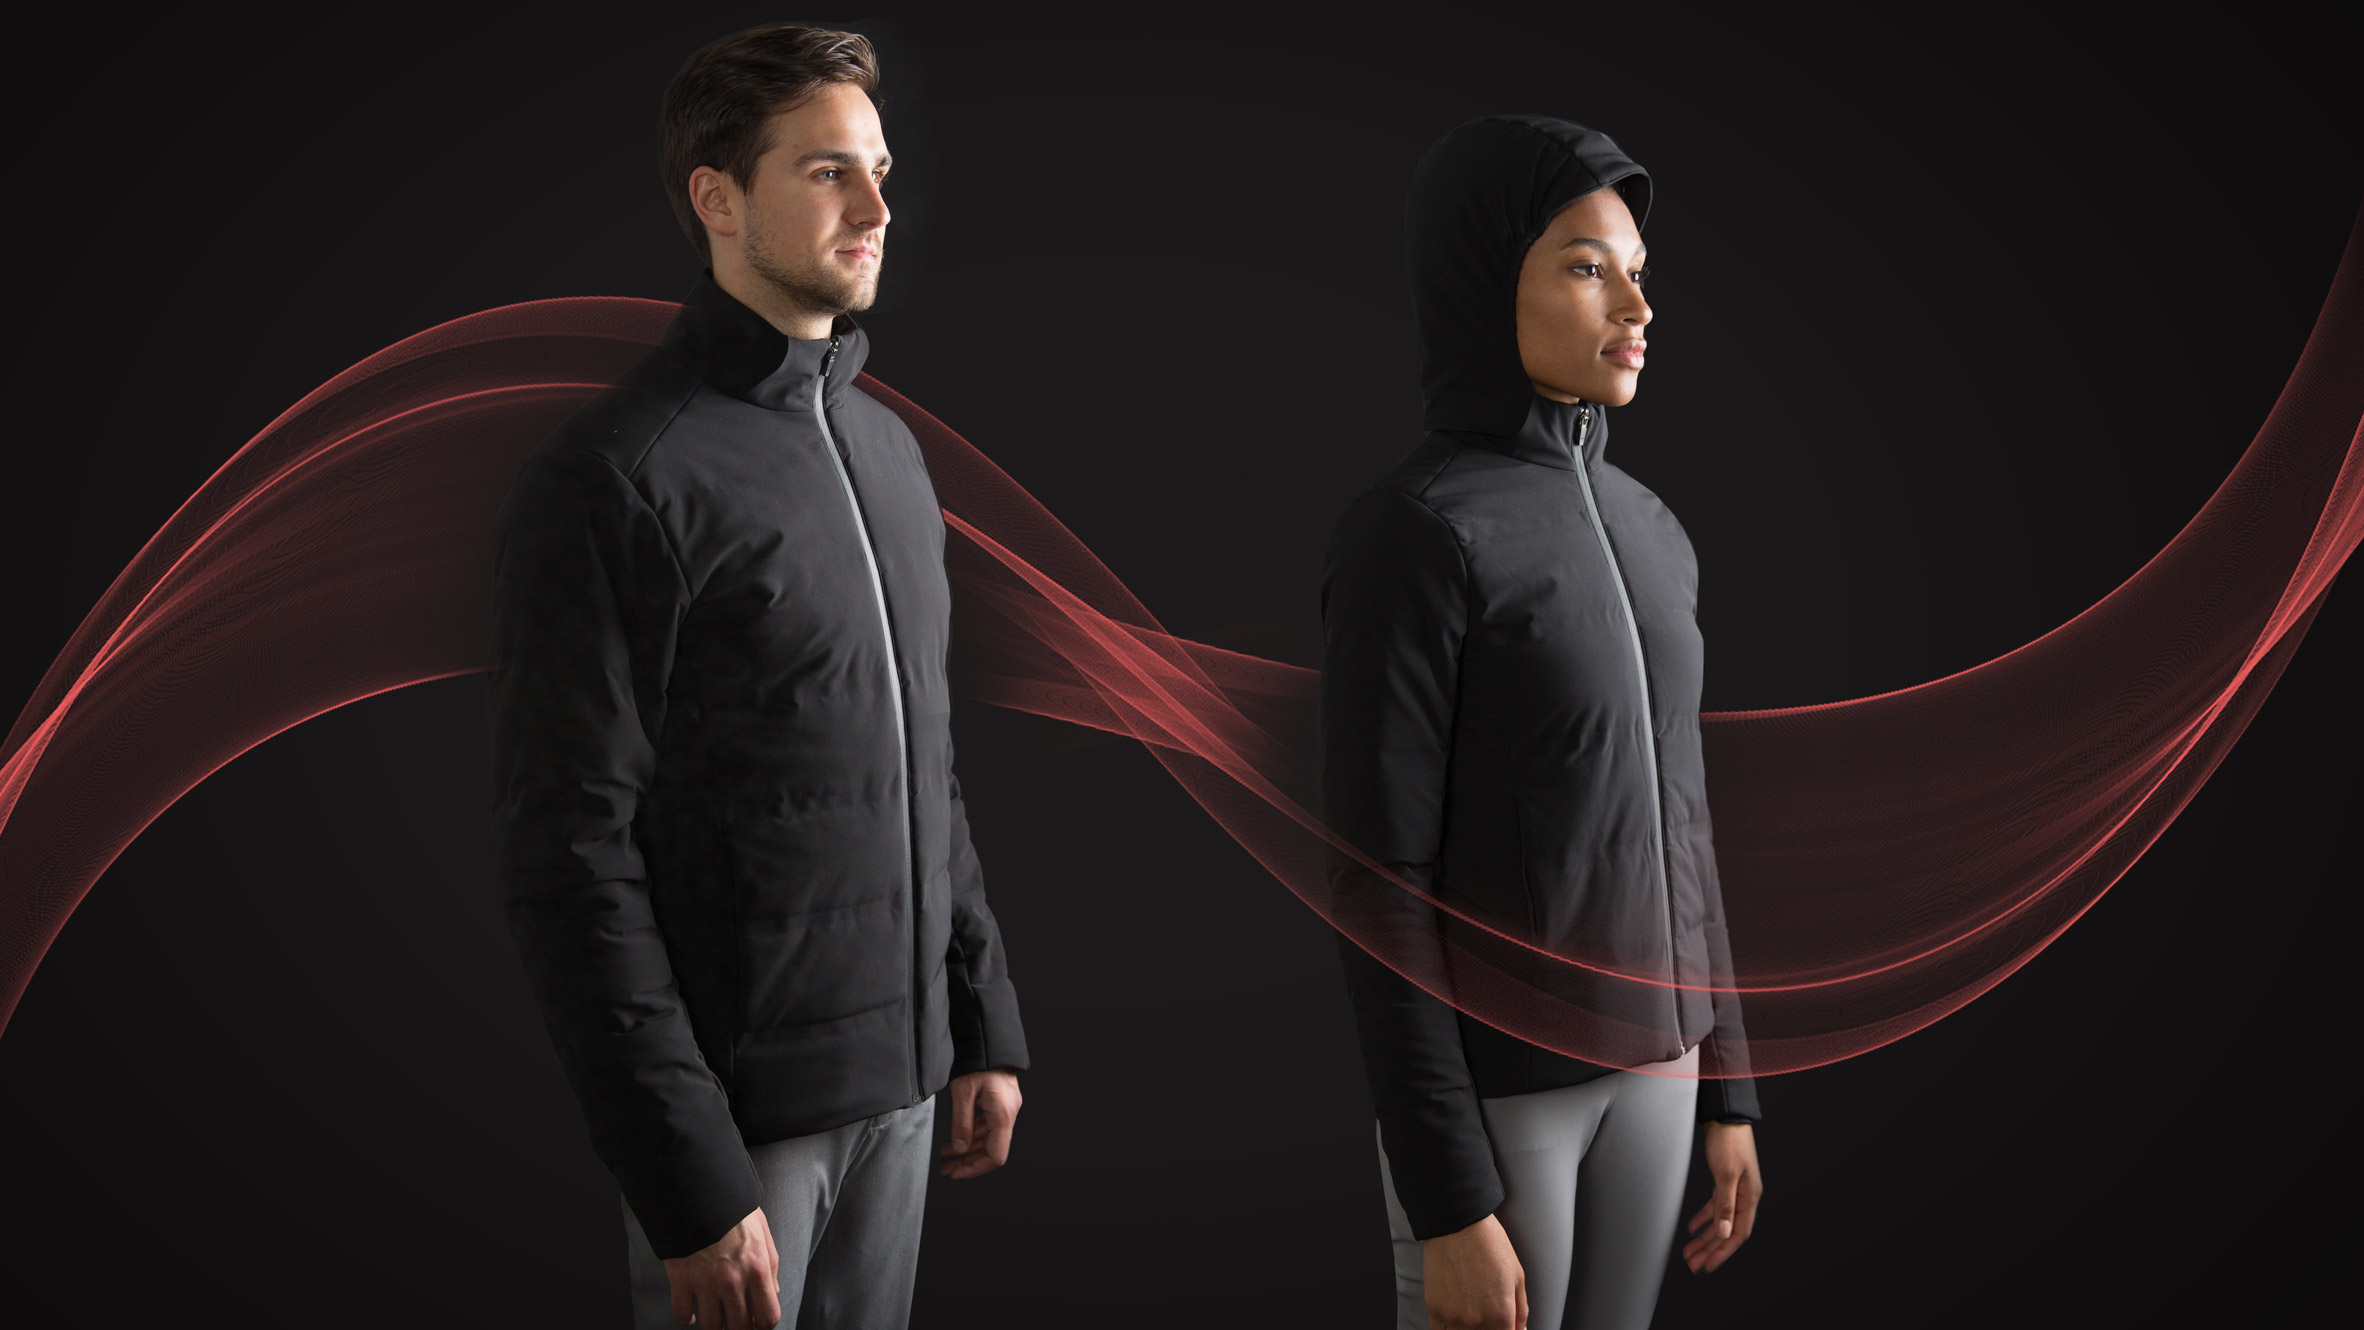 Self-heating smart jacket responds to changes in temperature